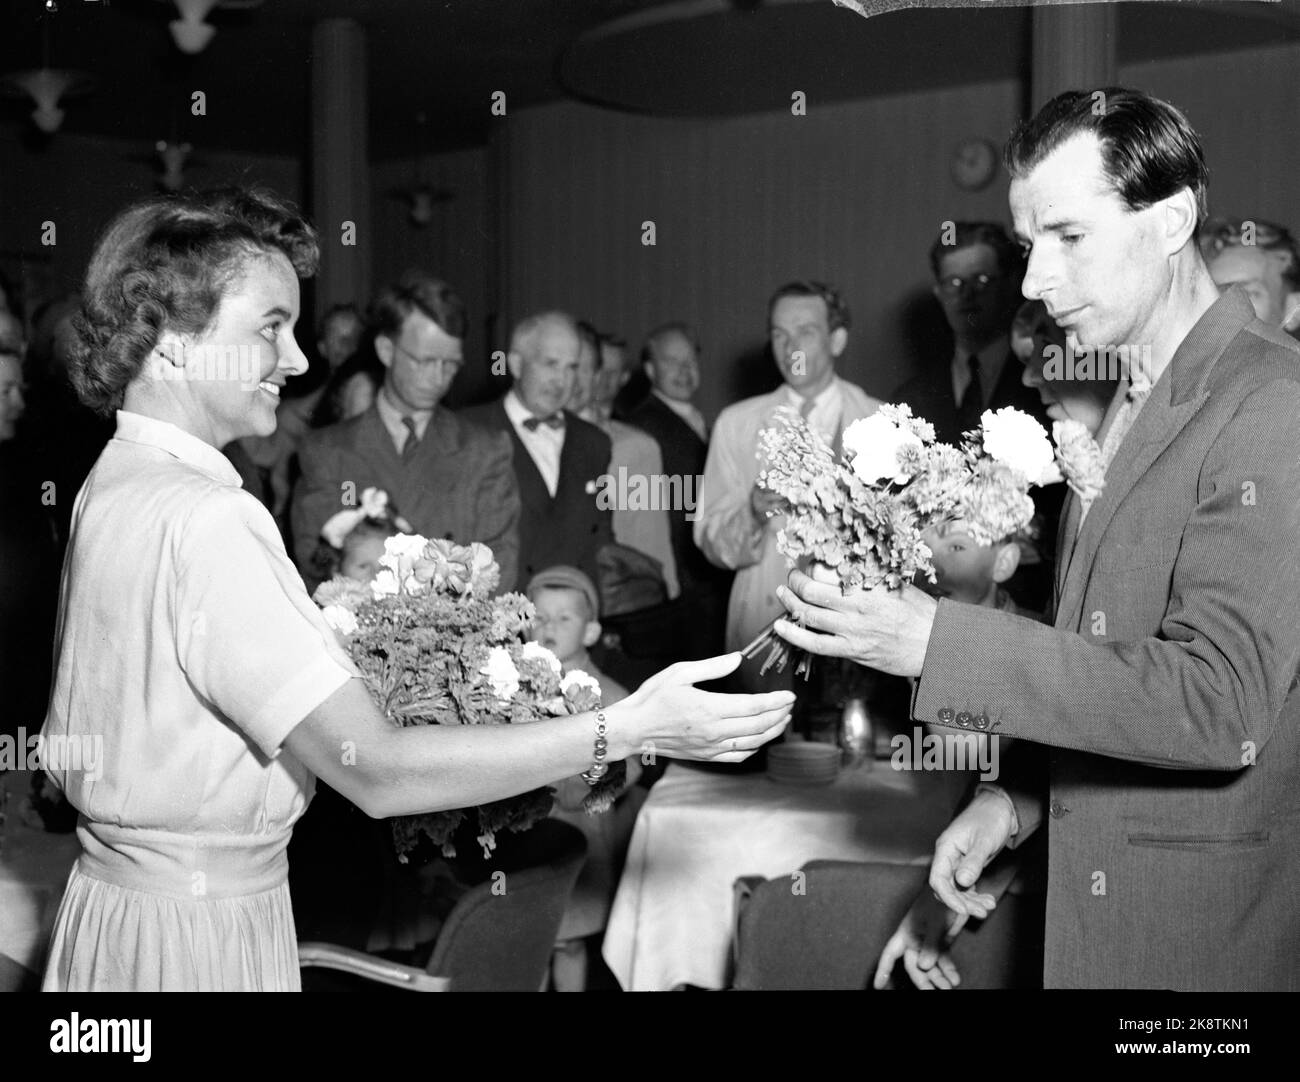 Oslo 19500816 Himalaya expedition led by Professor Arne Næs comes home after becoming the first team to climb the mountain Tirich Mir (7705m) on the border between Pakistan and Afghanistan. Here, Professor Arne Næs receives flowers on arrival. Photo: NTB / NTB Stock Photo